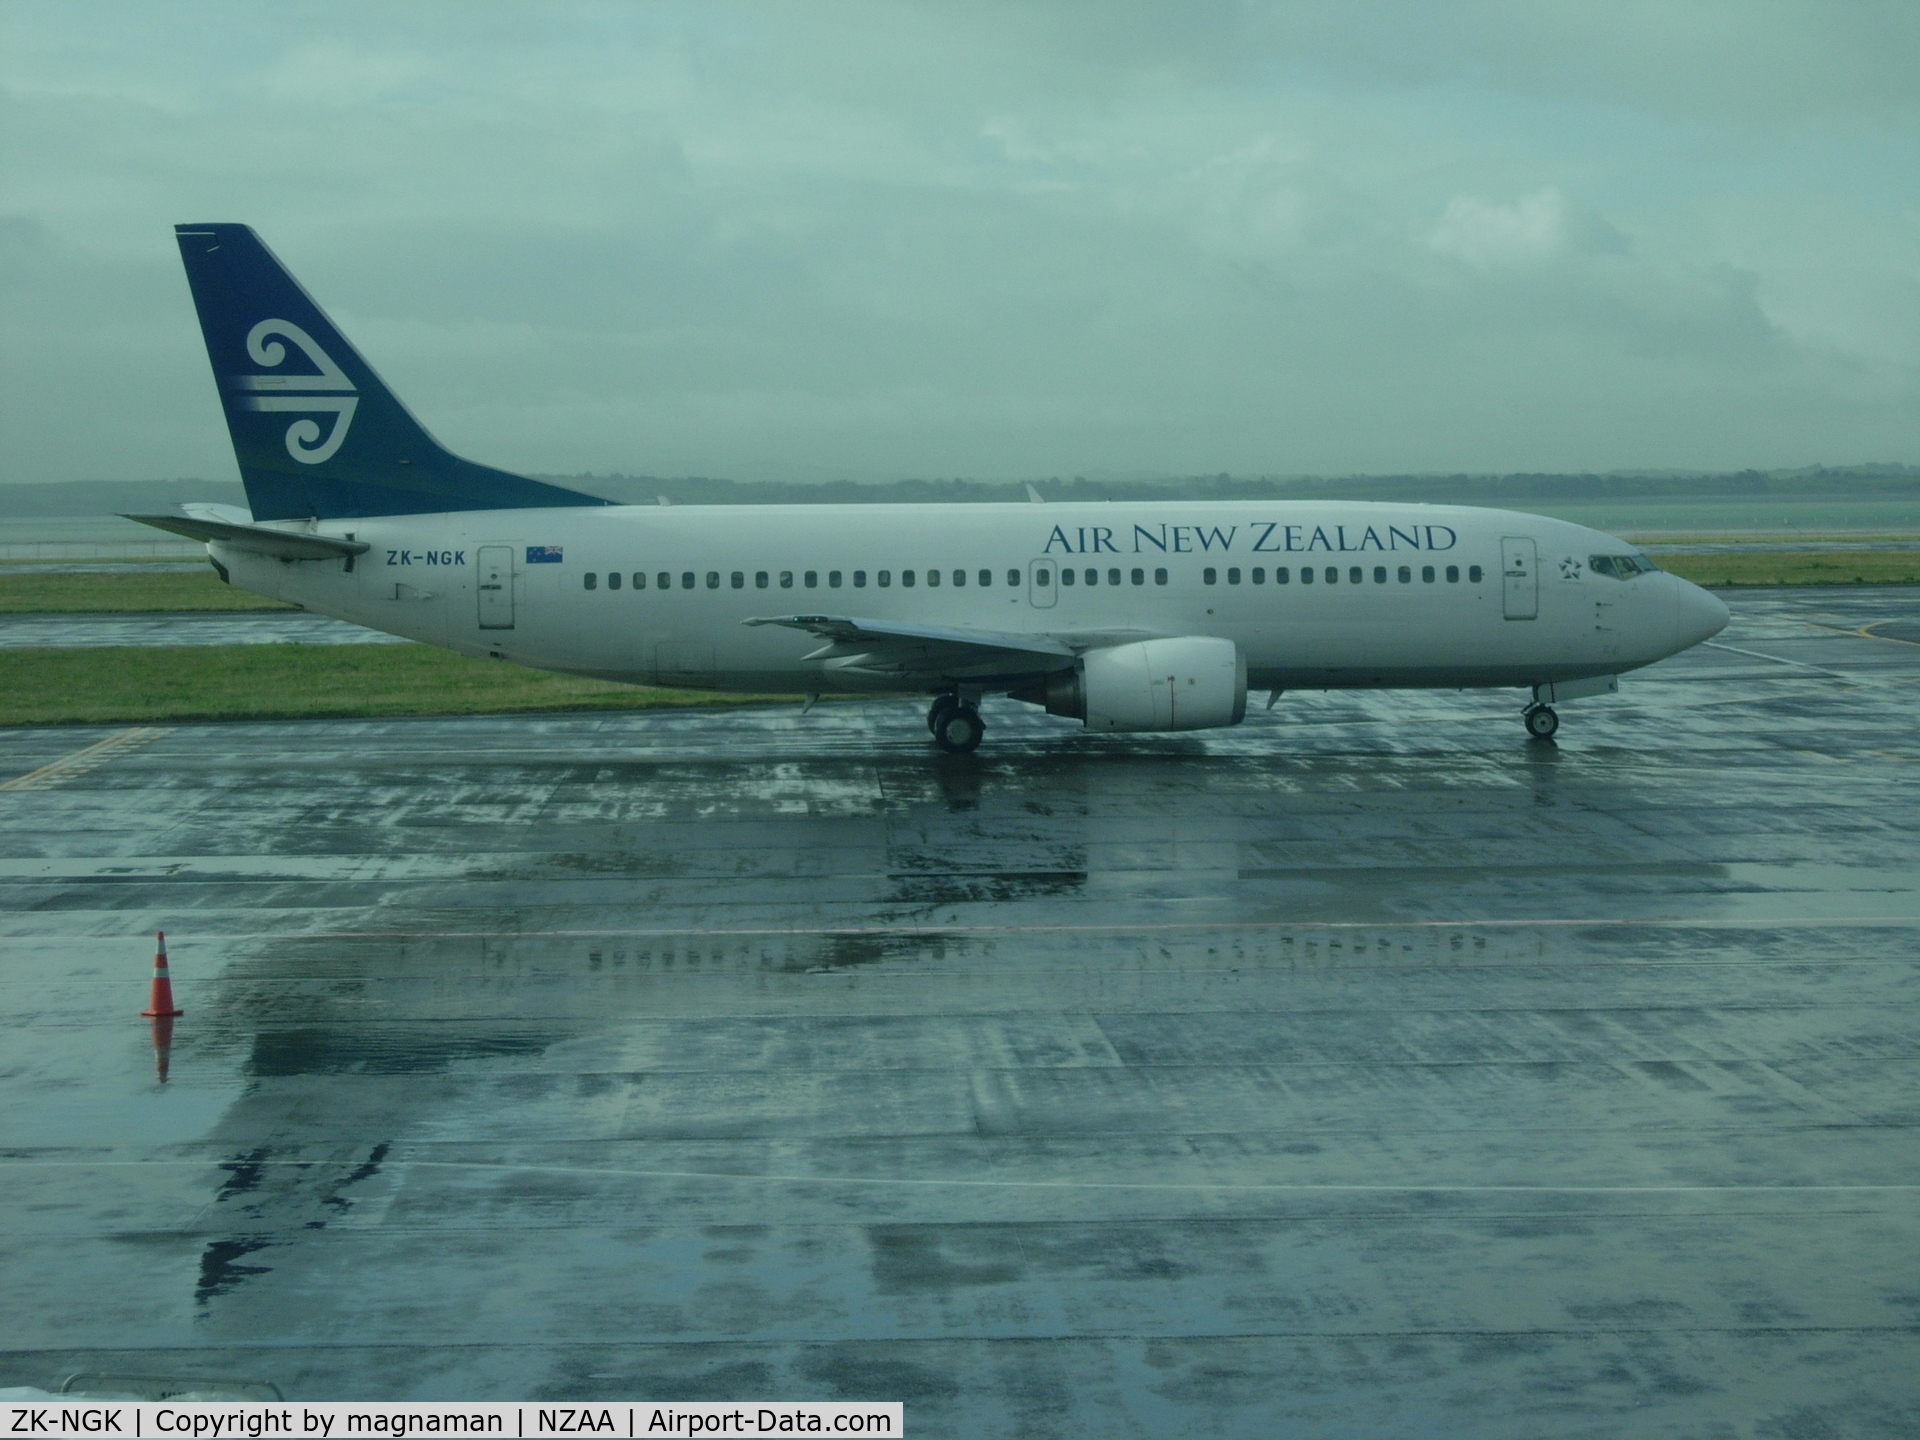 ZK-NGK, 1995 Boeing 737-3K2 C/N 26318, From a wet AKL airport - view from domestic baggage collection window.